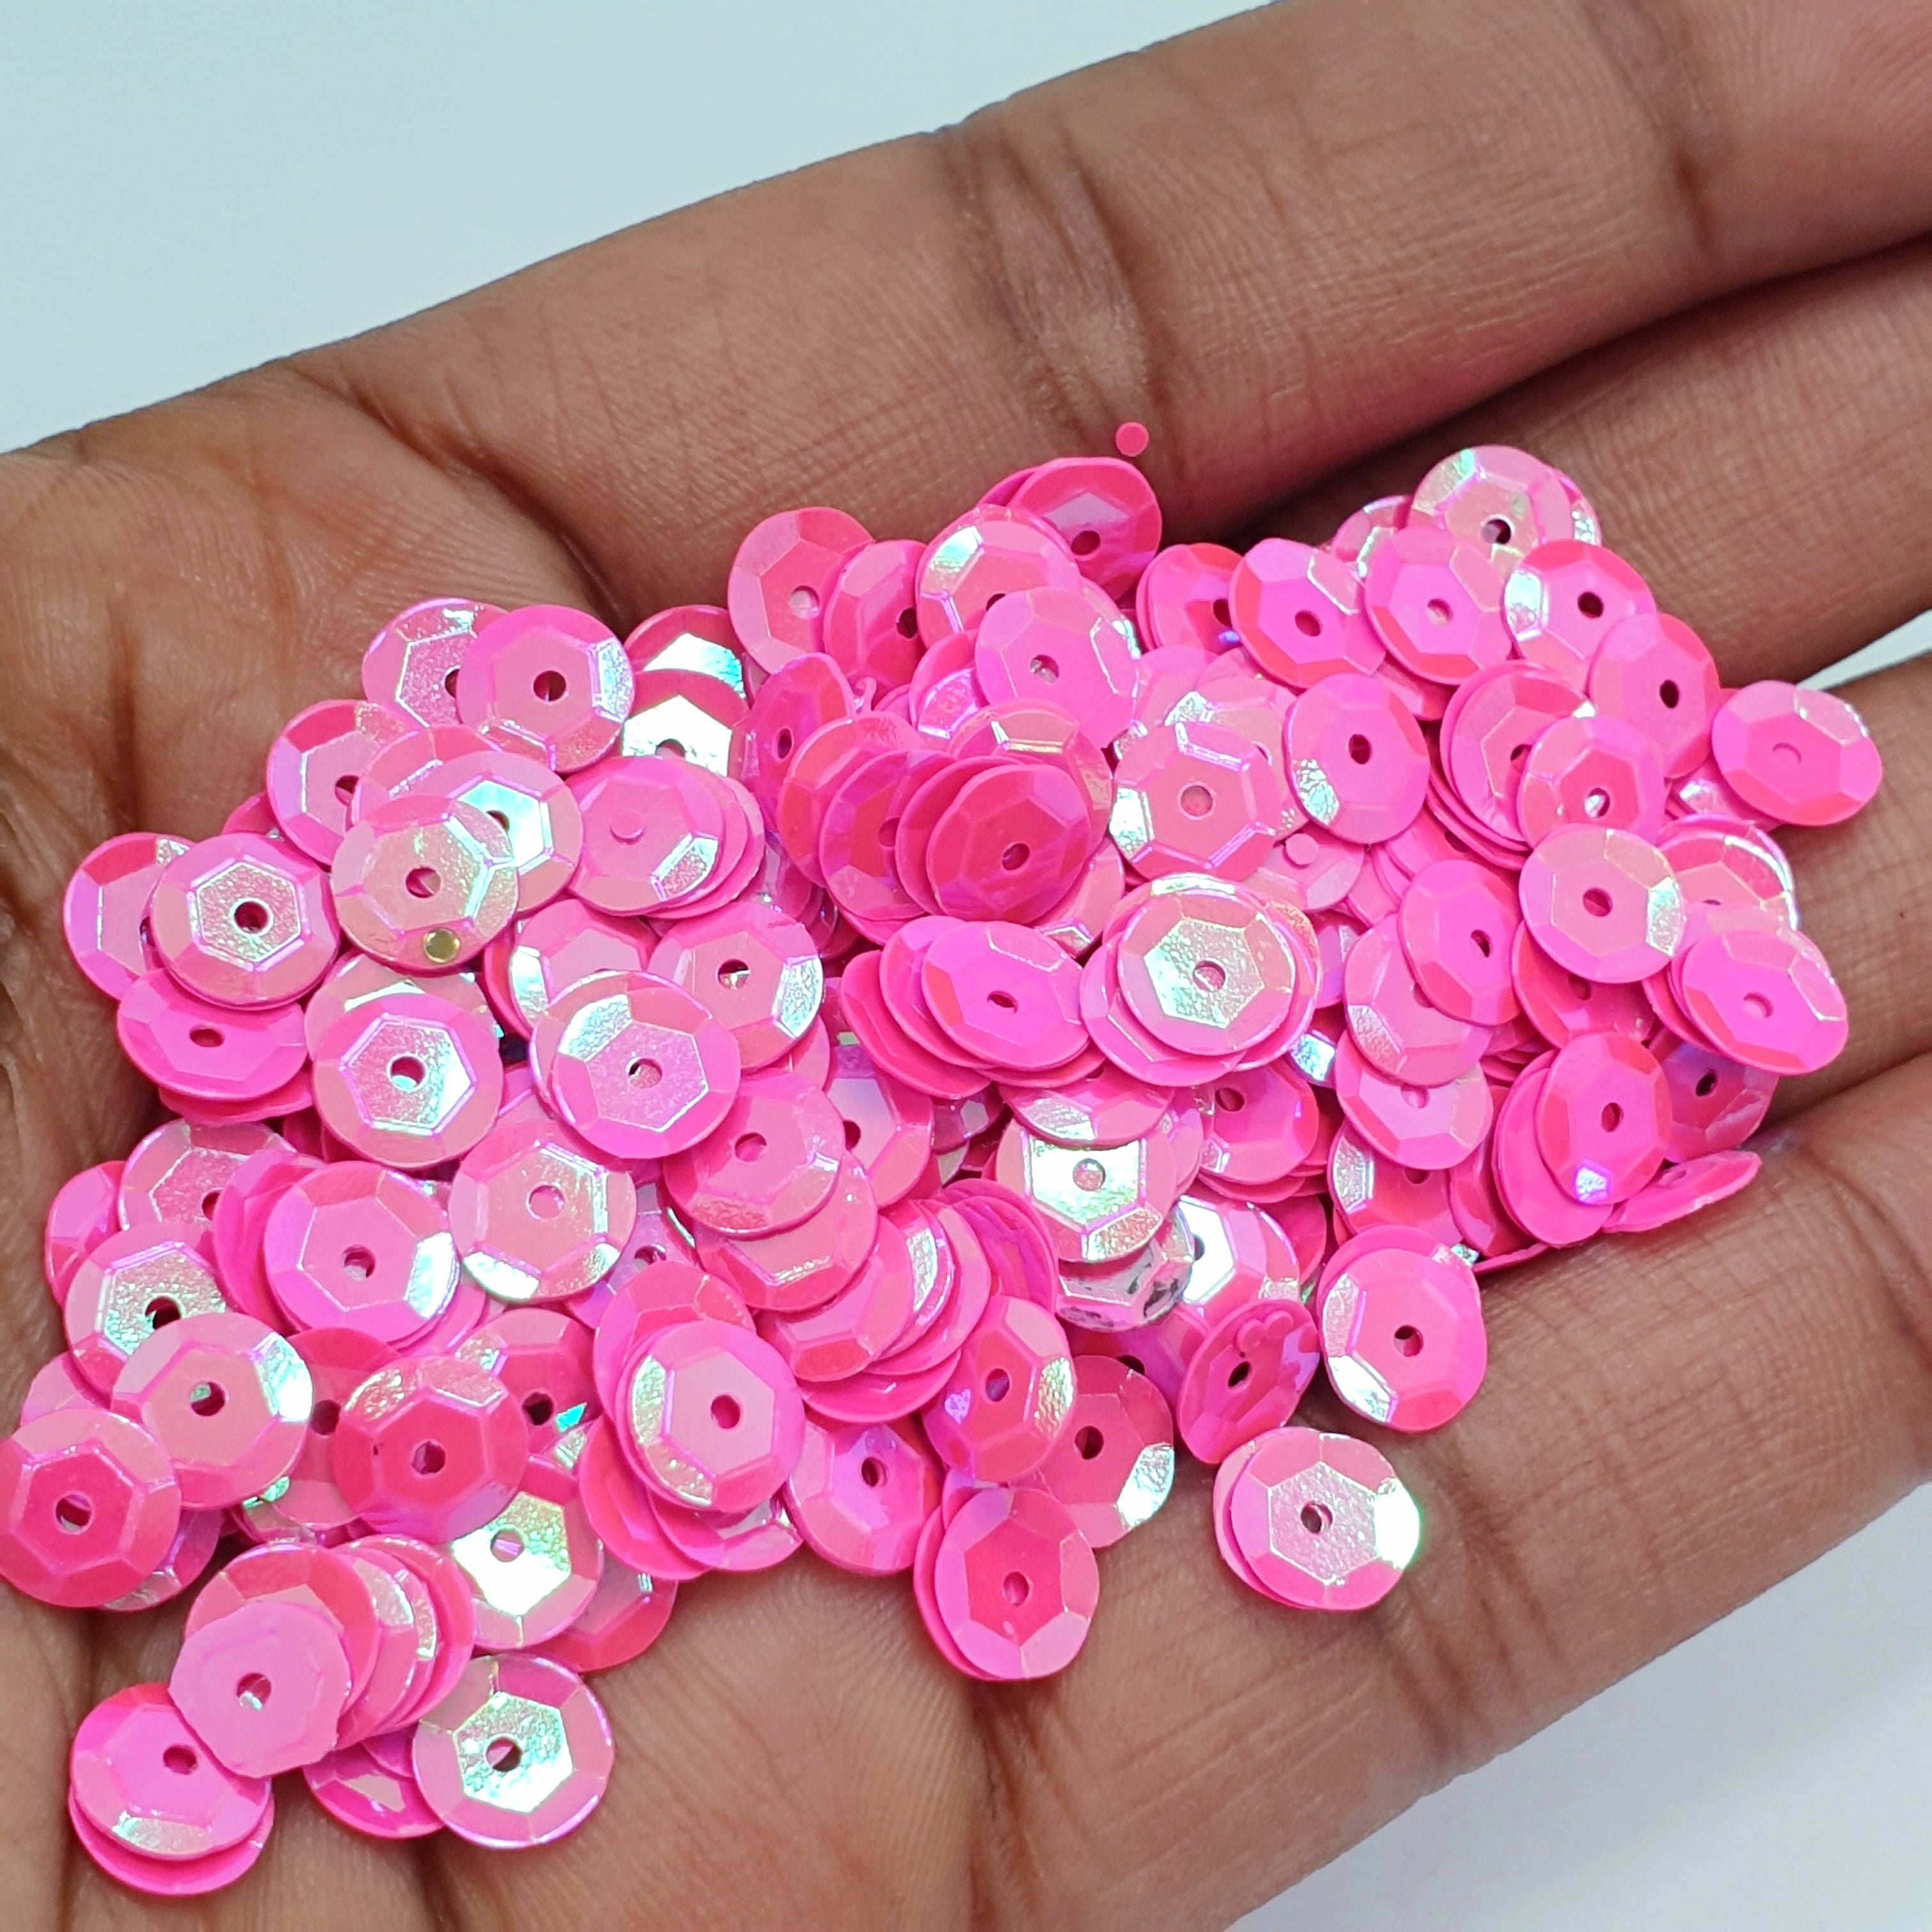 MajorCrafts 50grams 6mm Hot Pink AB Round Sew-On Cup Sequins